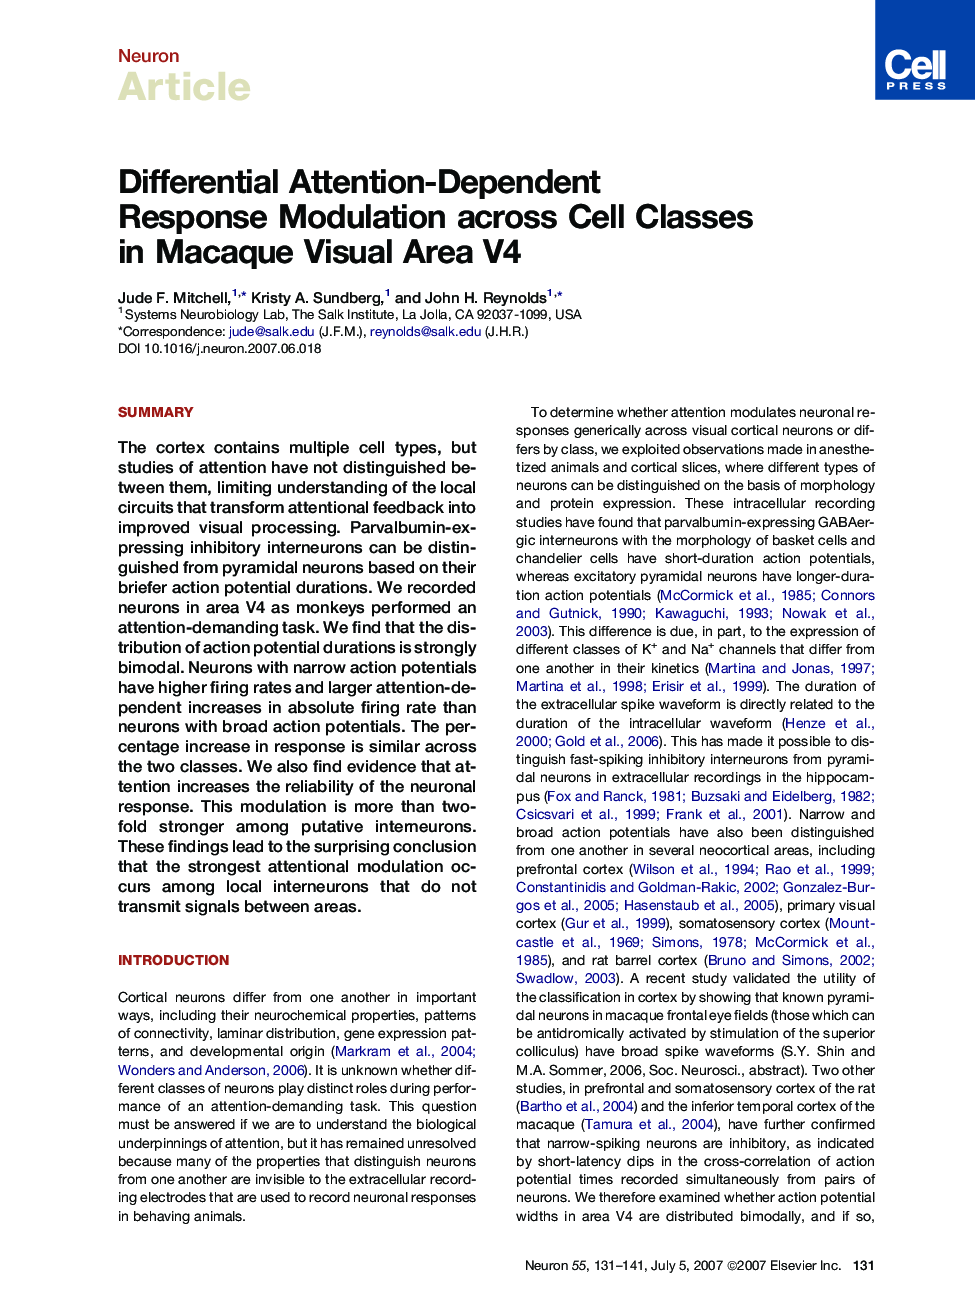 Differential Attention-Dependent Response Modulation across Cell Classes in Macaque Visual Area V4